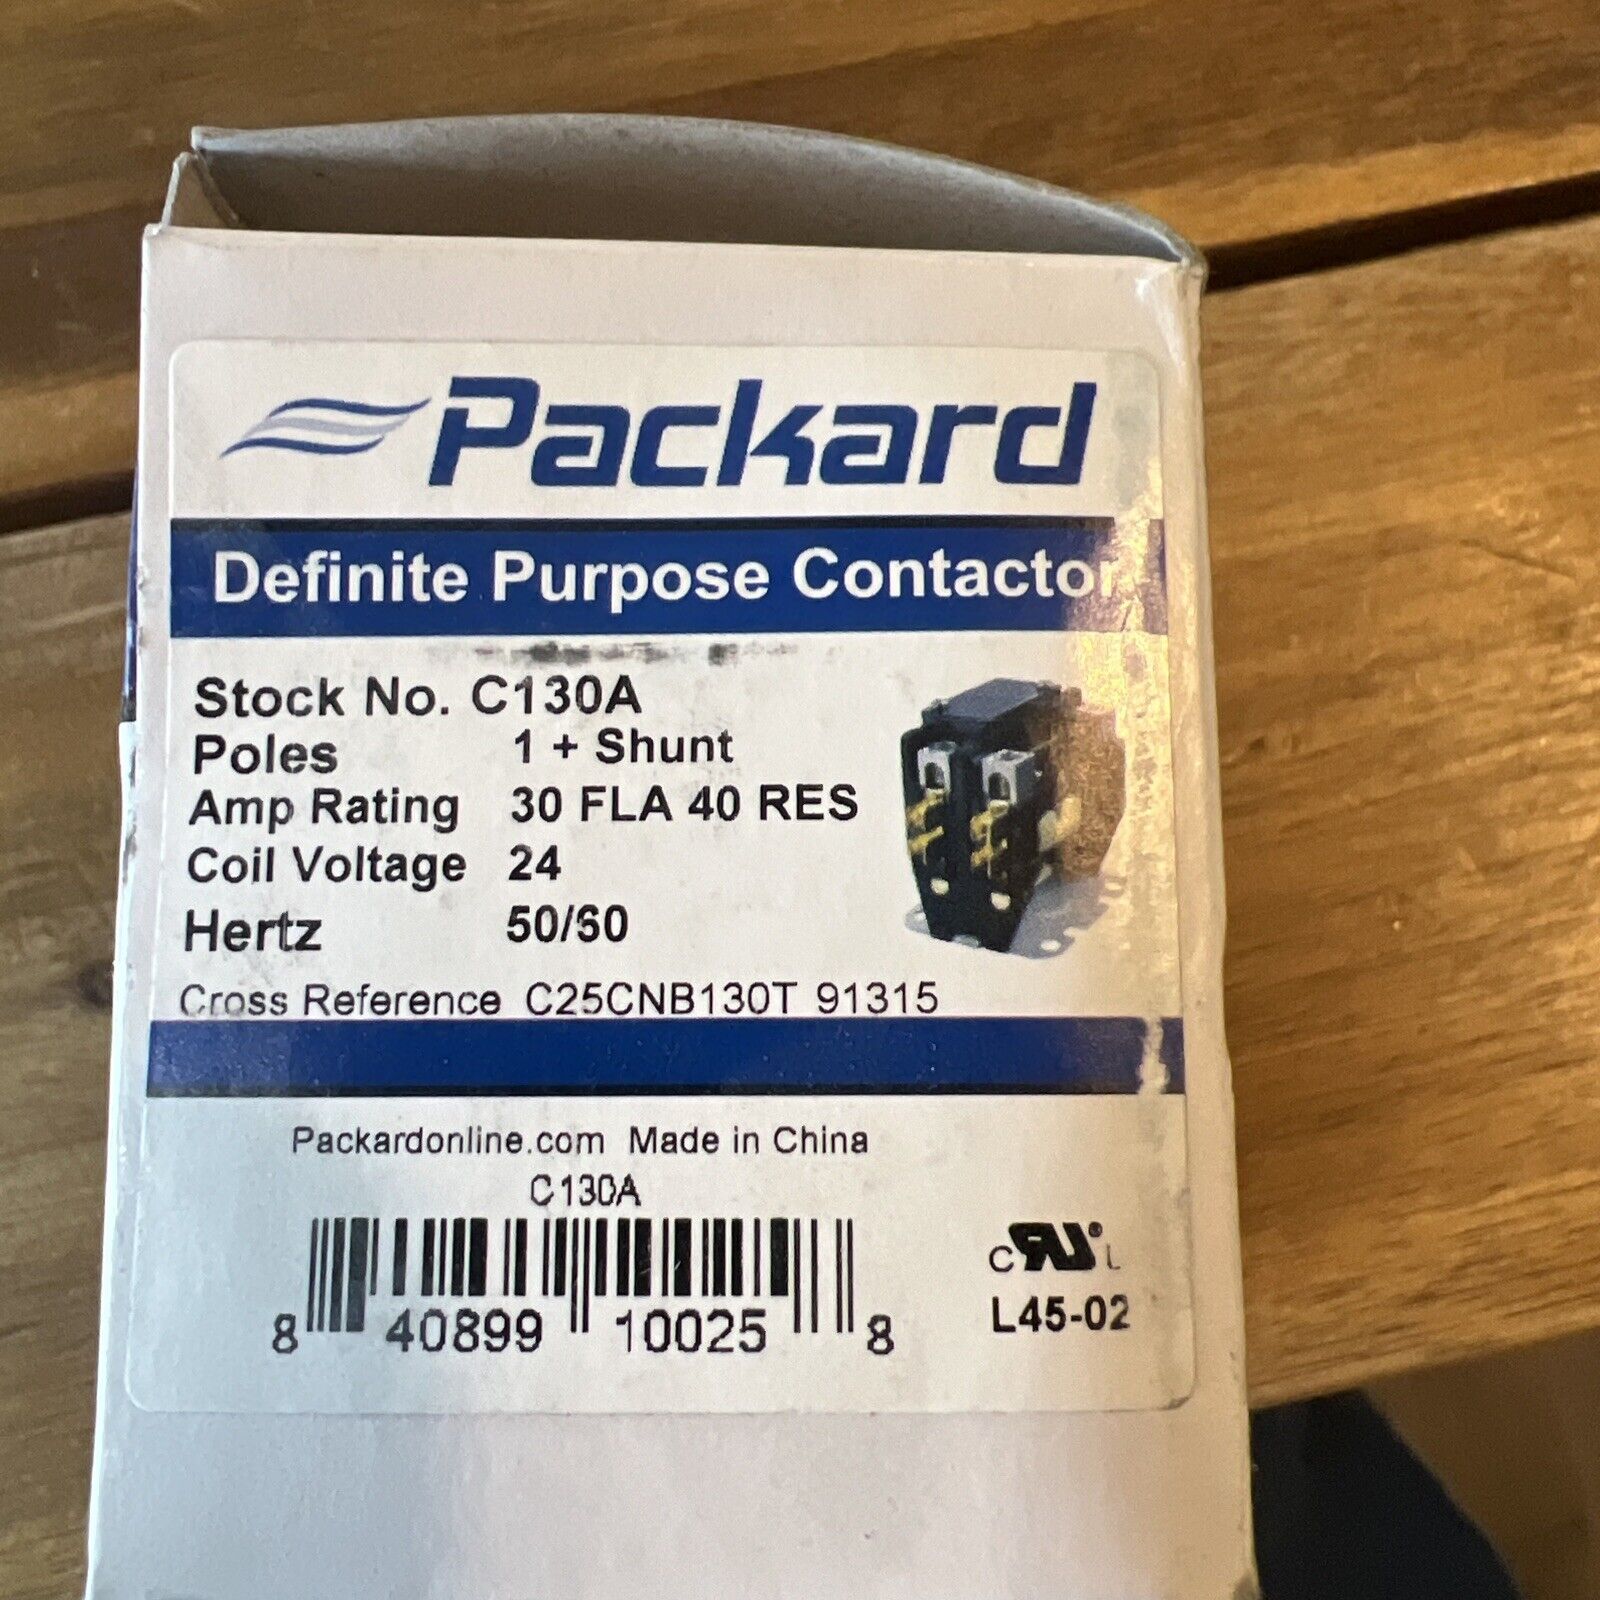 Packard C130A Contactor 1 Pole 30 Amps 24 Coil Voltage - BUY MORE & SAVE